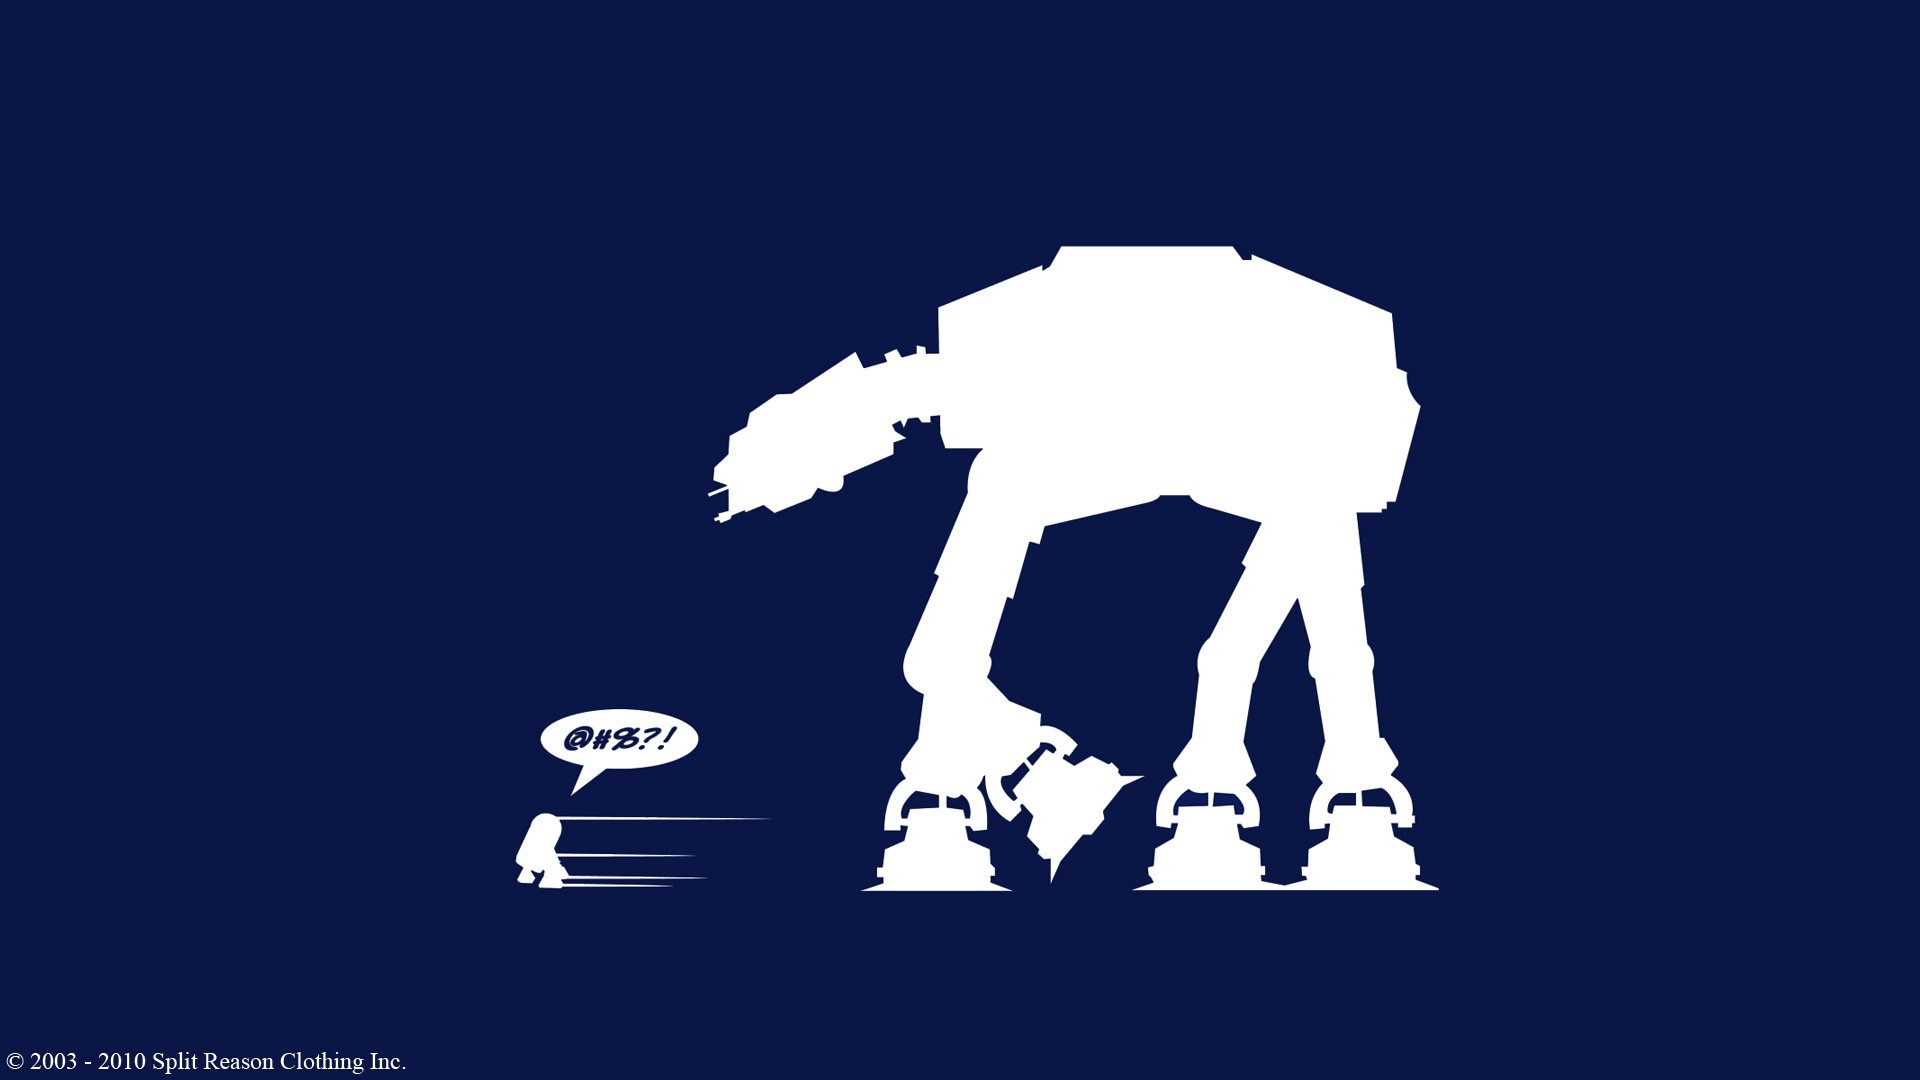 General 1920x1080 humor AT-AT 2010 (Year) minimalism blue background Star Wars Humor science fiction simple background vehicle Star Wars Droids